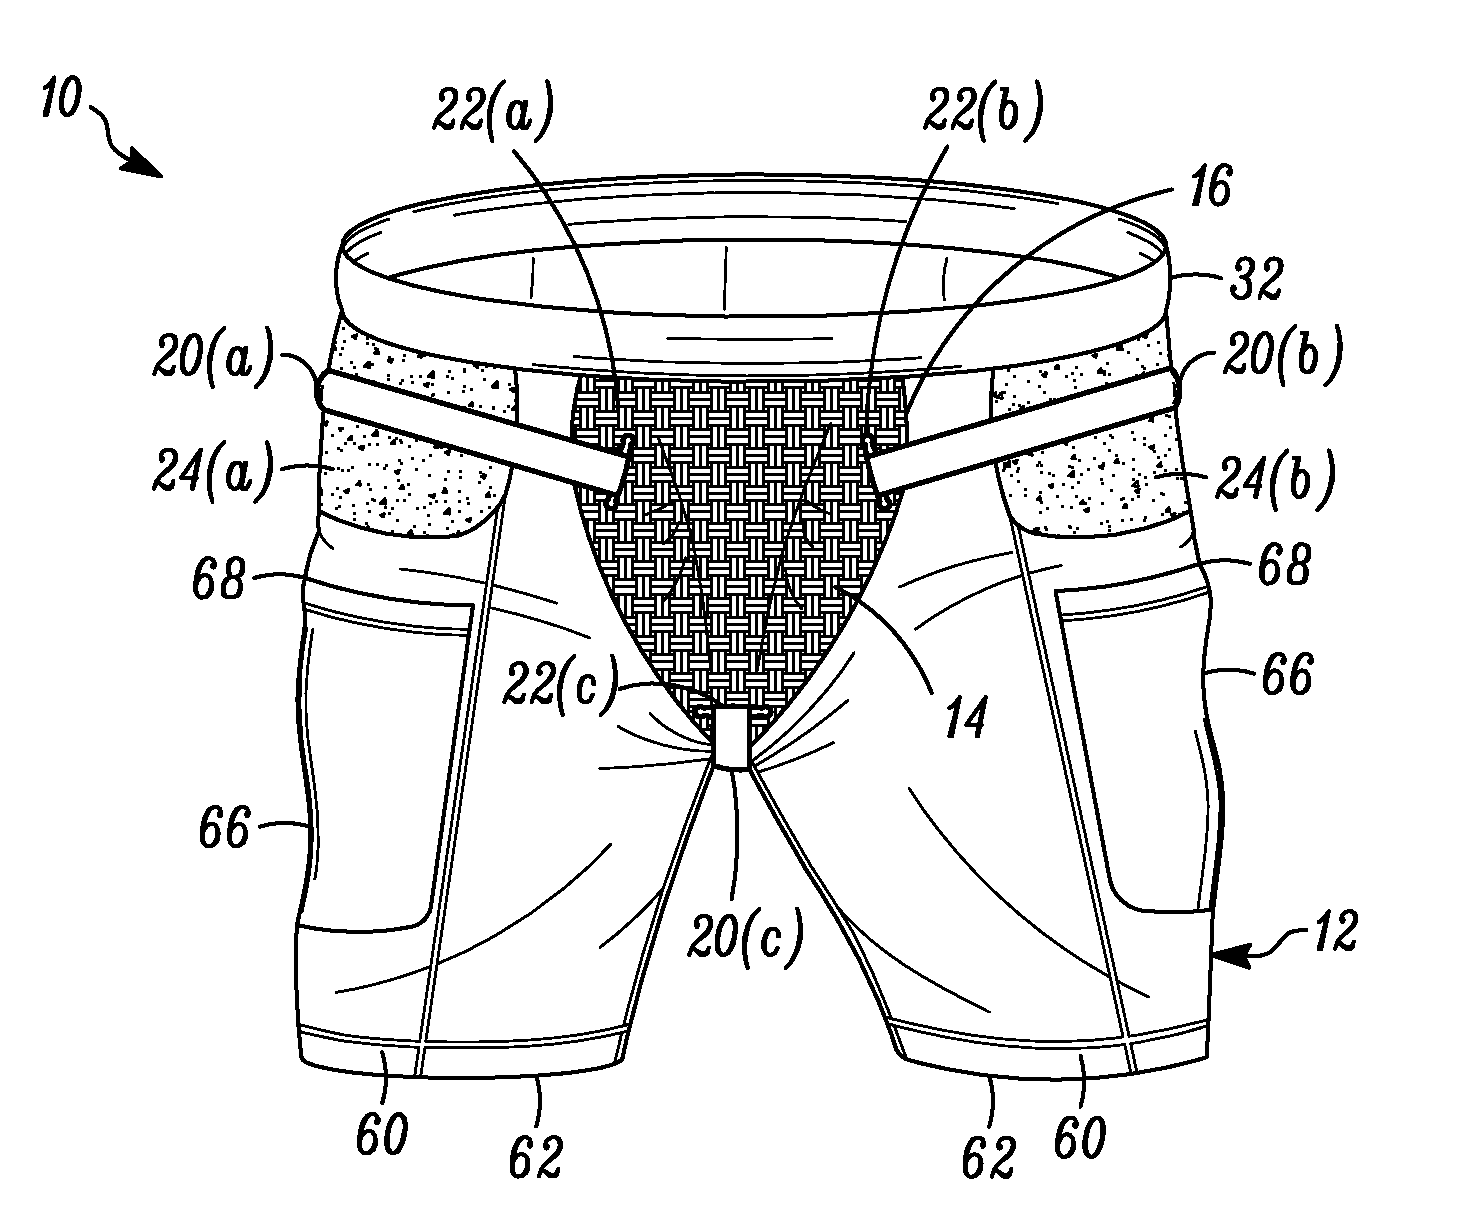 Athletic undergarment and protective cup assembly